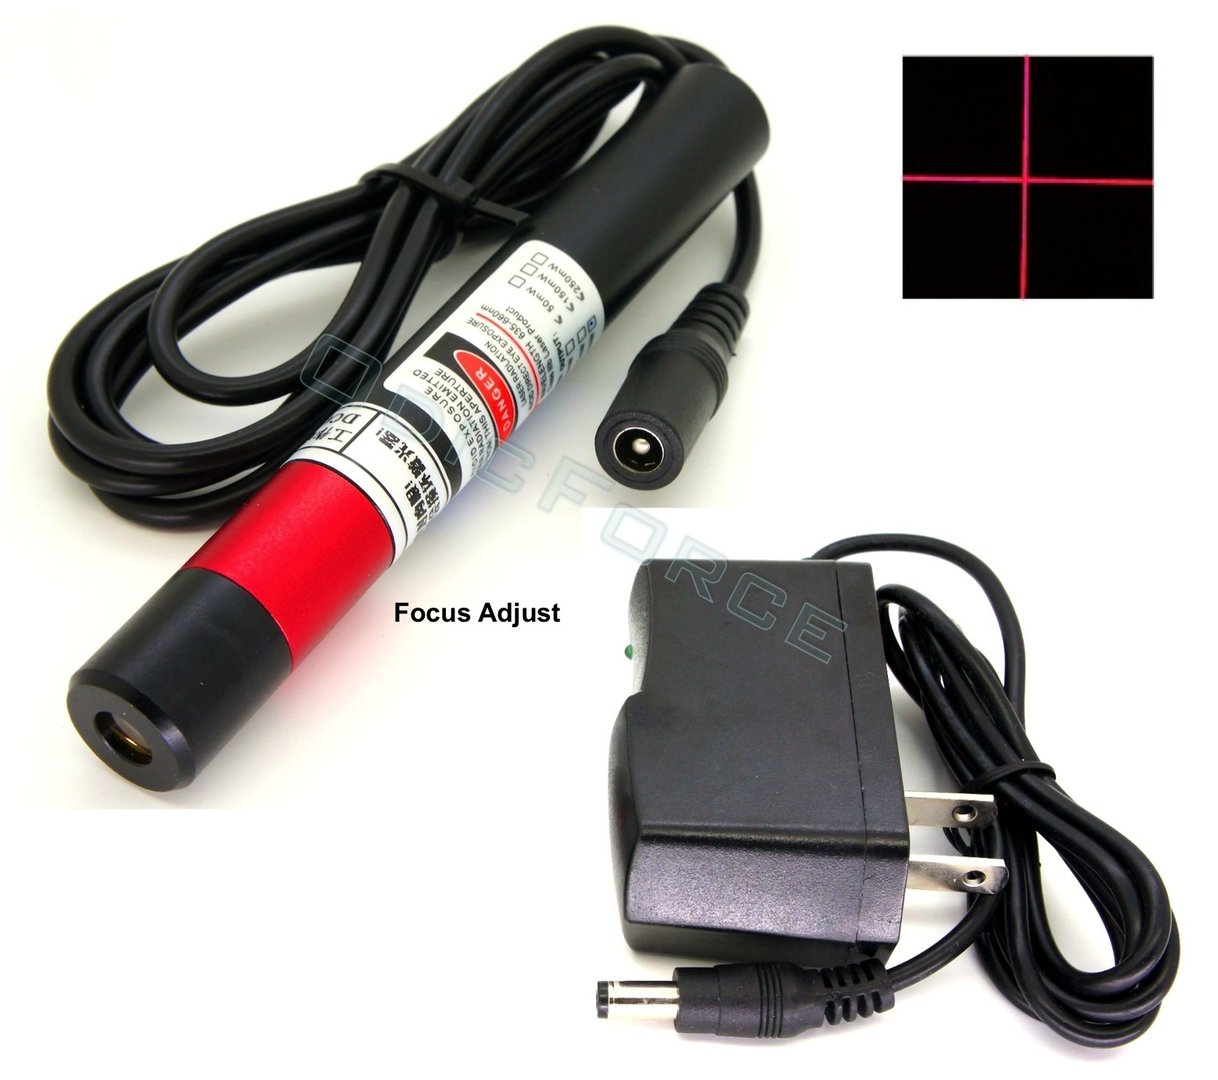 200mW Fine Focusing Red (660nm) Cross-hair Laser Module (5V) With 110-240V Power Supply (16mm)